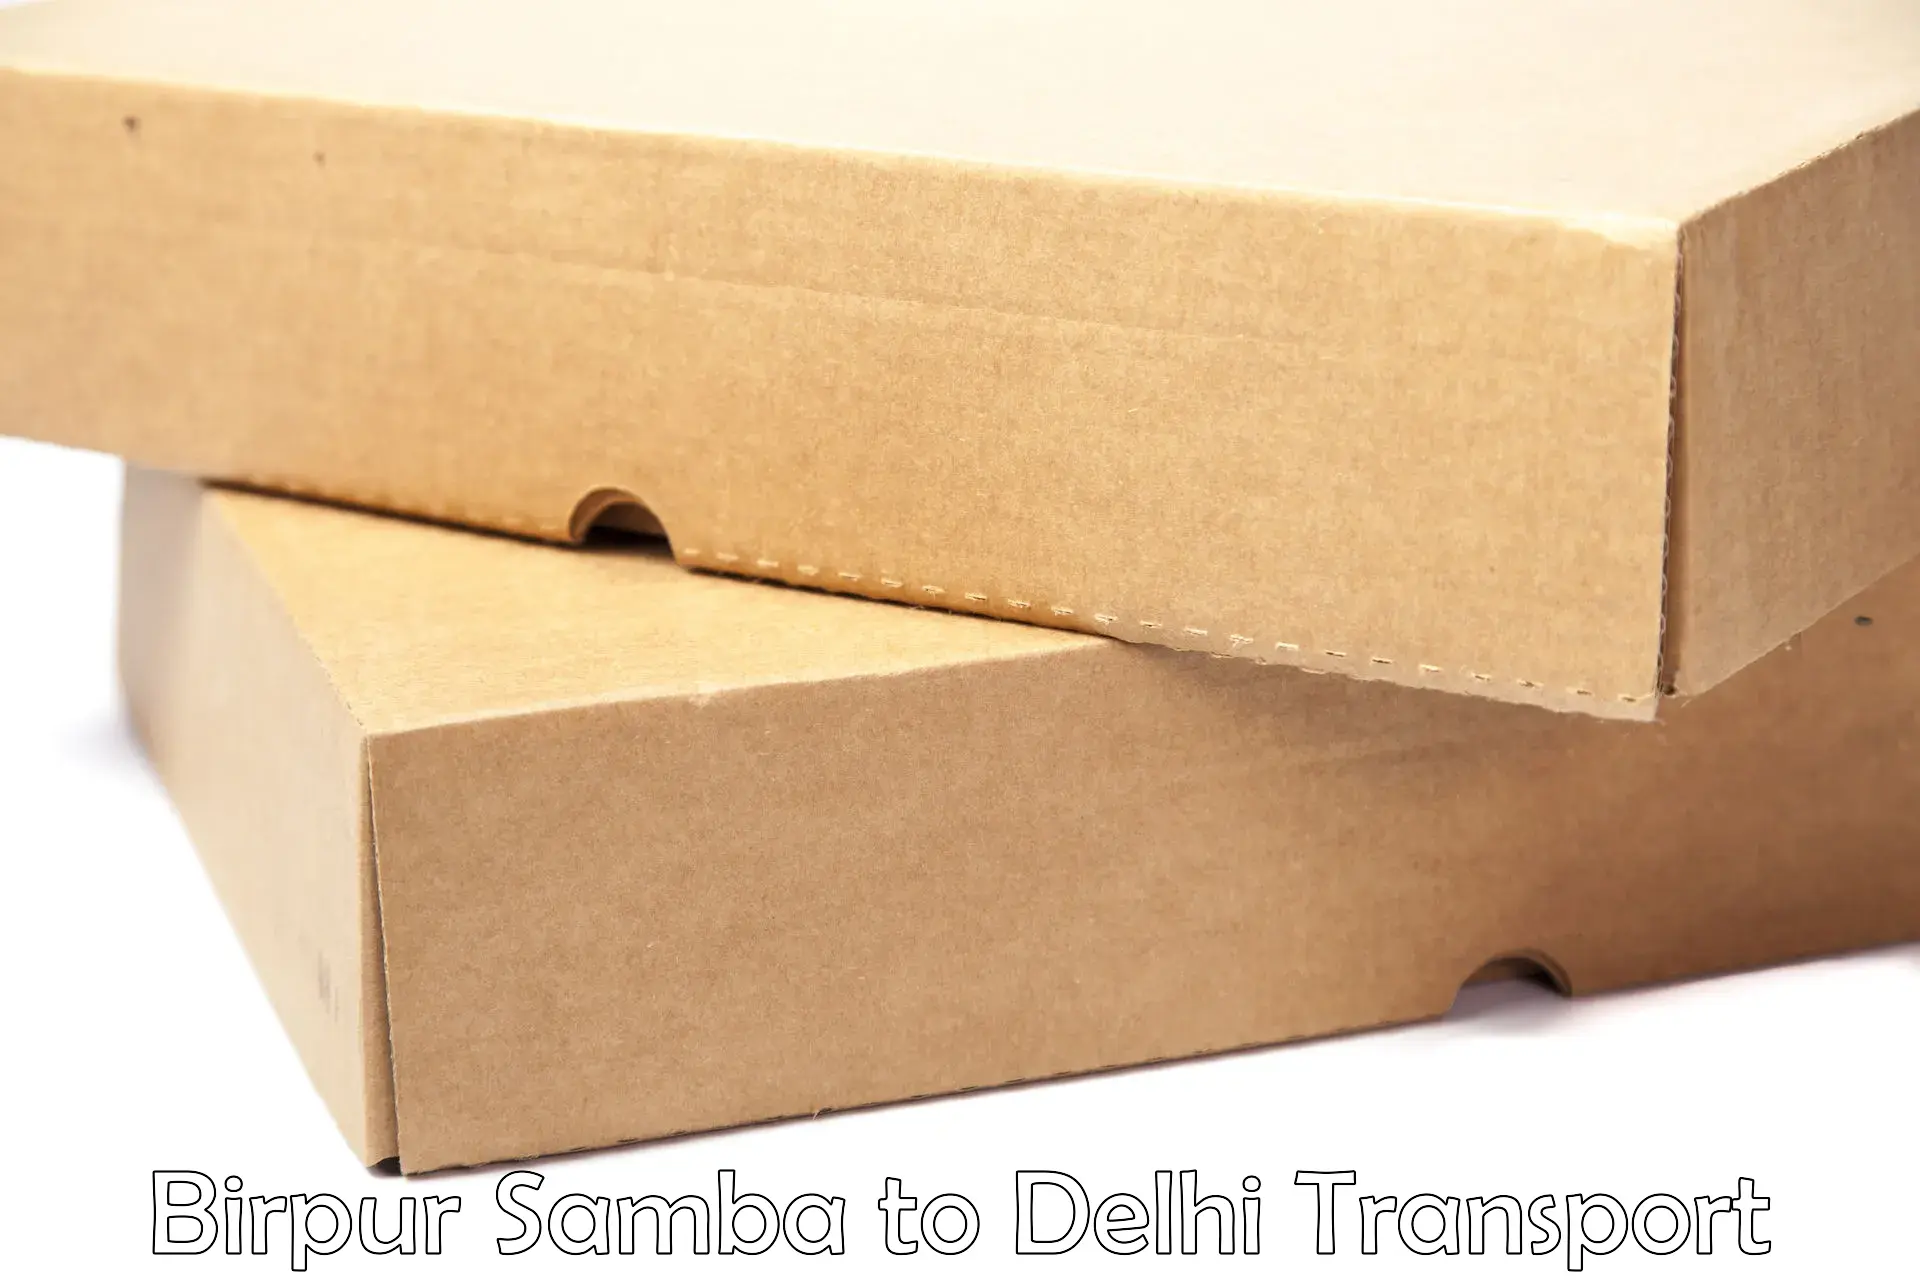 Air freight transport services in Birpur Samba to NCR